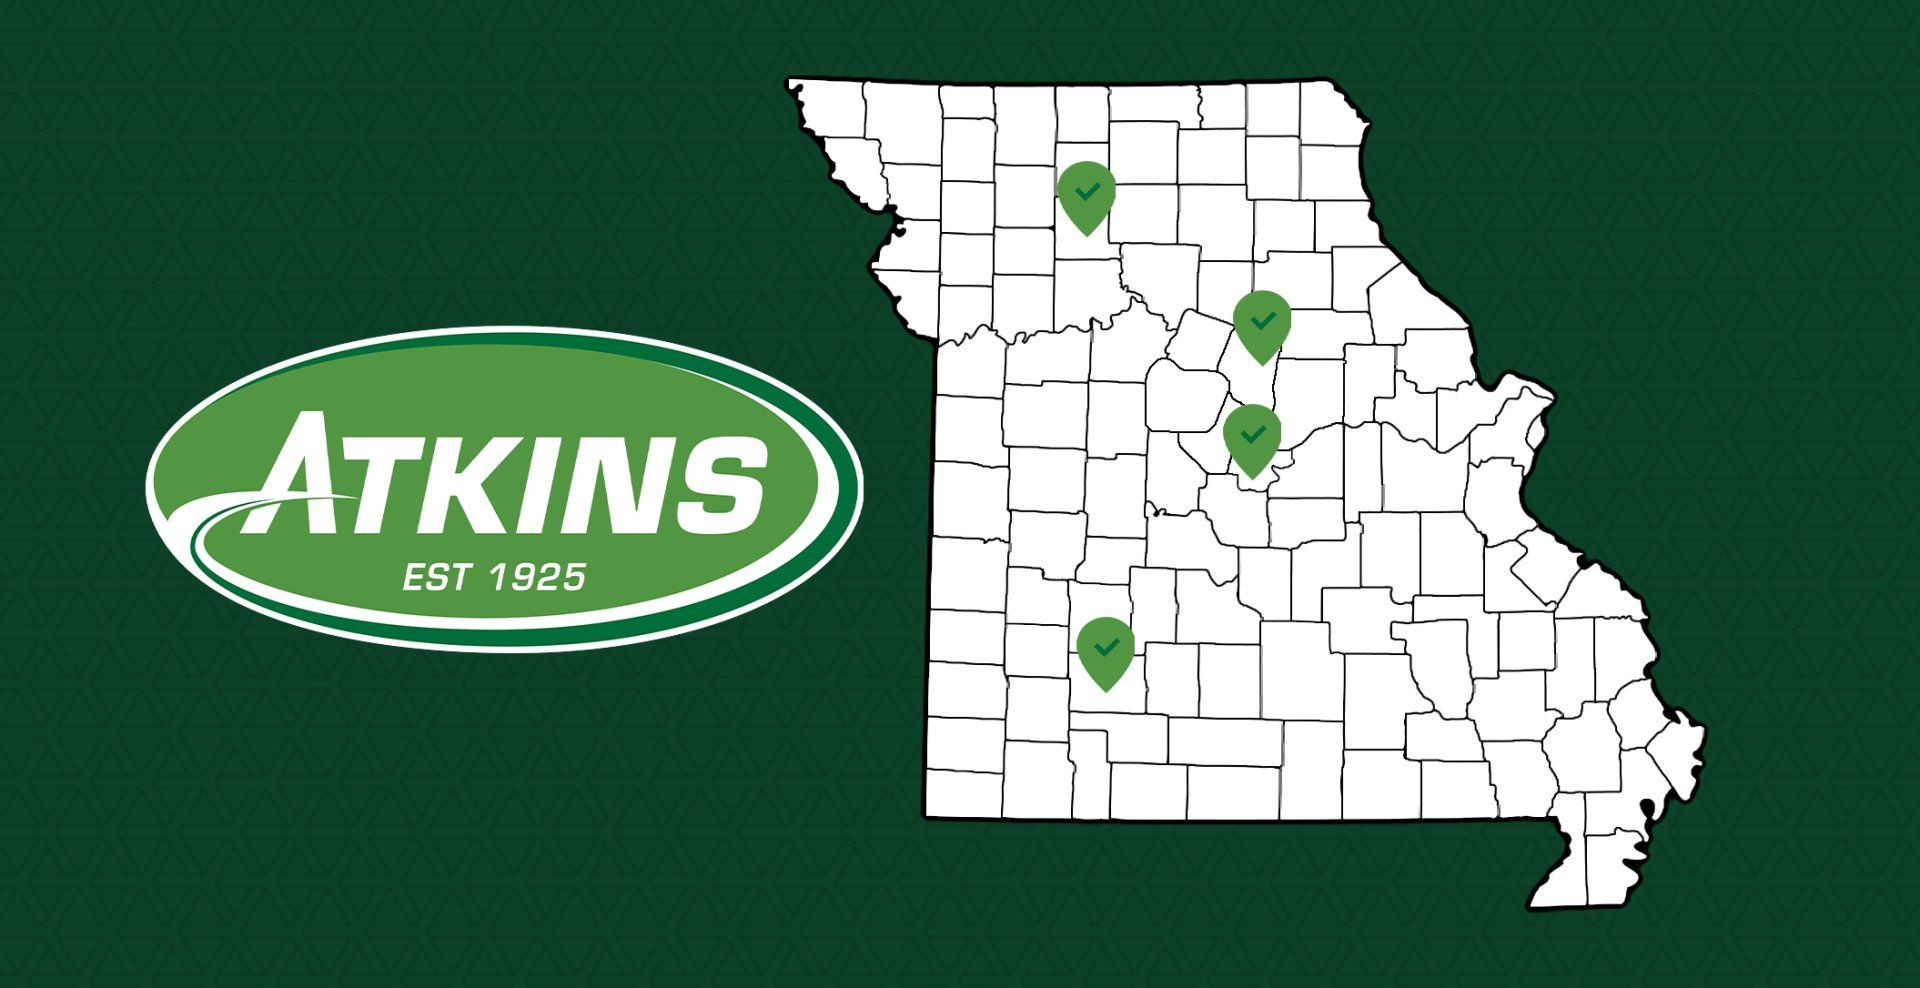 Call Atkins for Residential Pest Control in Chillicothe, MO.!